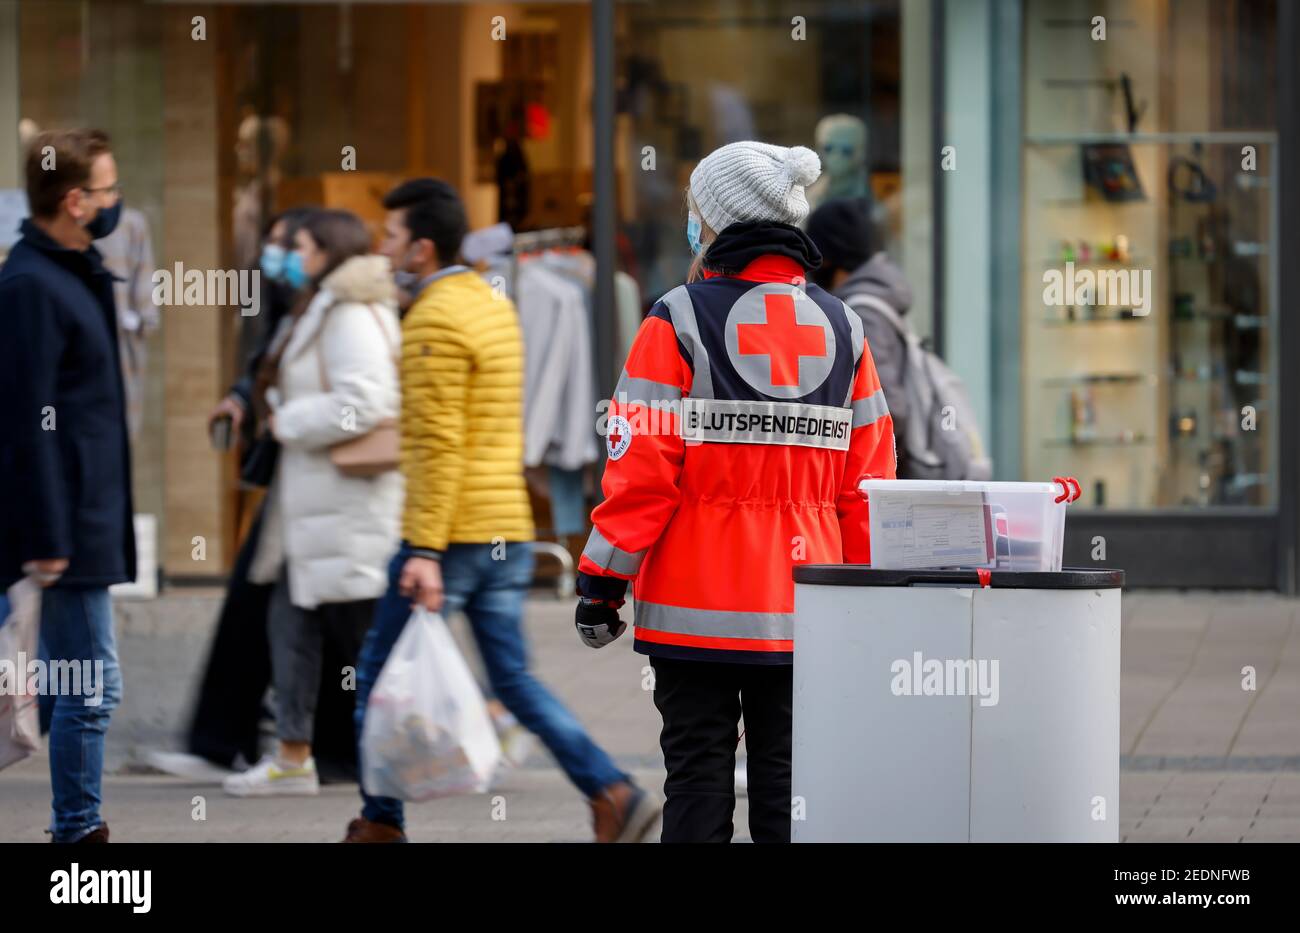 21.11.2020, Essen, North Rhine-Westphalia, Germany - Employees of the DRK Blutspendedienst West (German Red Cross Blood Donation Service West) stand a Stock Photo